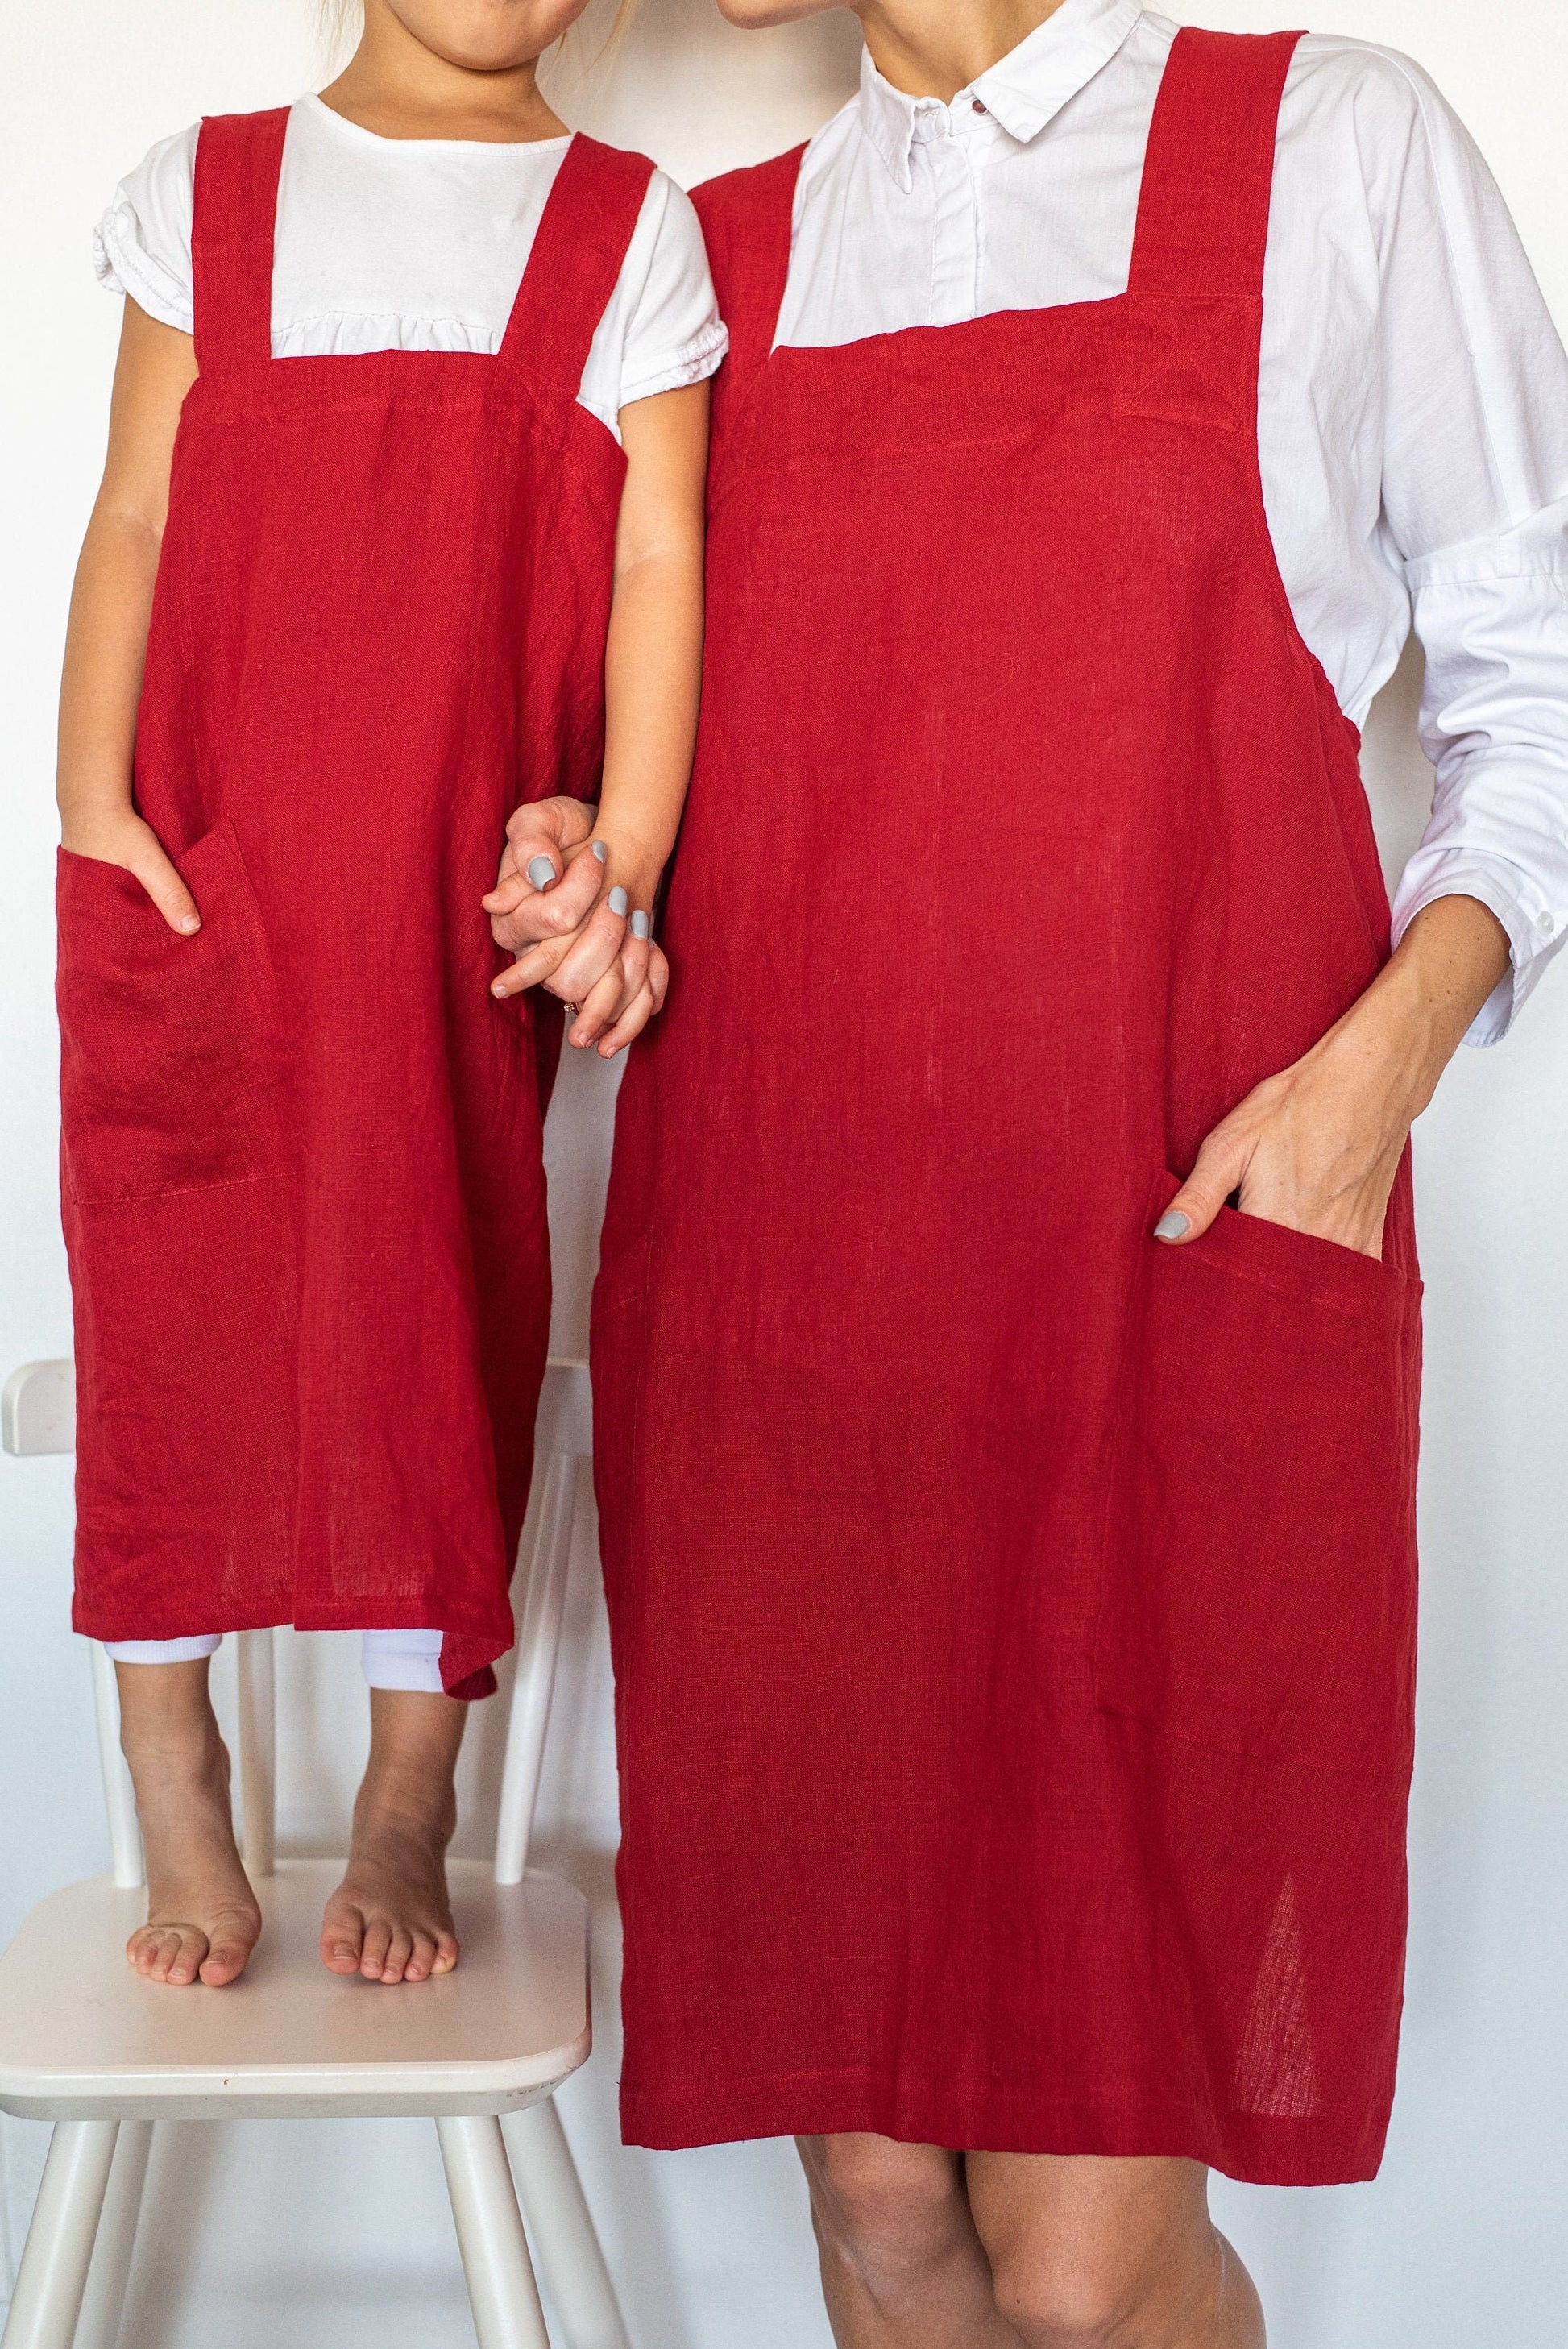 Japanese-inspired linen apron in a vibrant Christmas red set